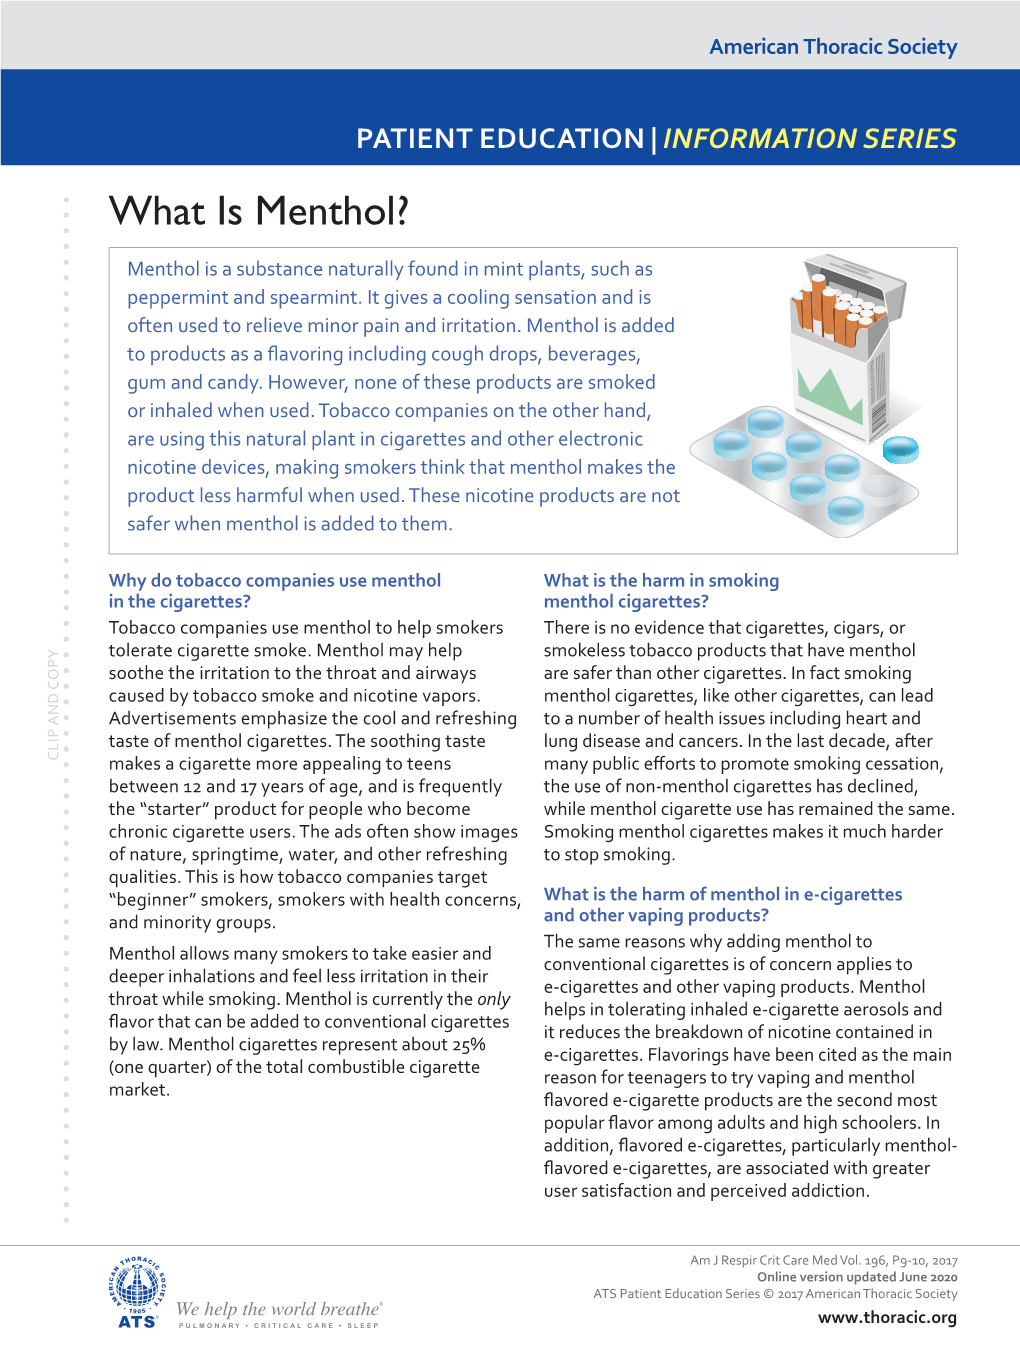 What Is Menthol?